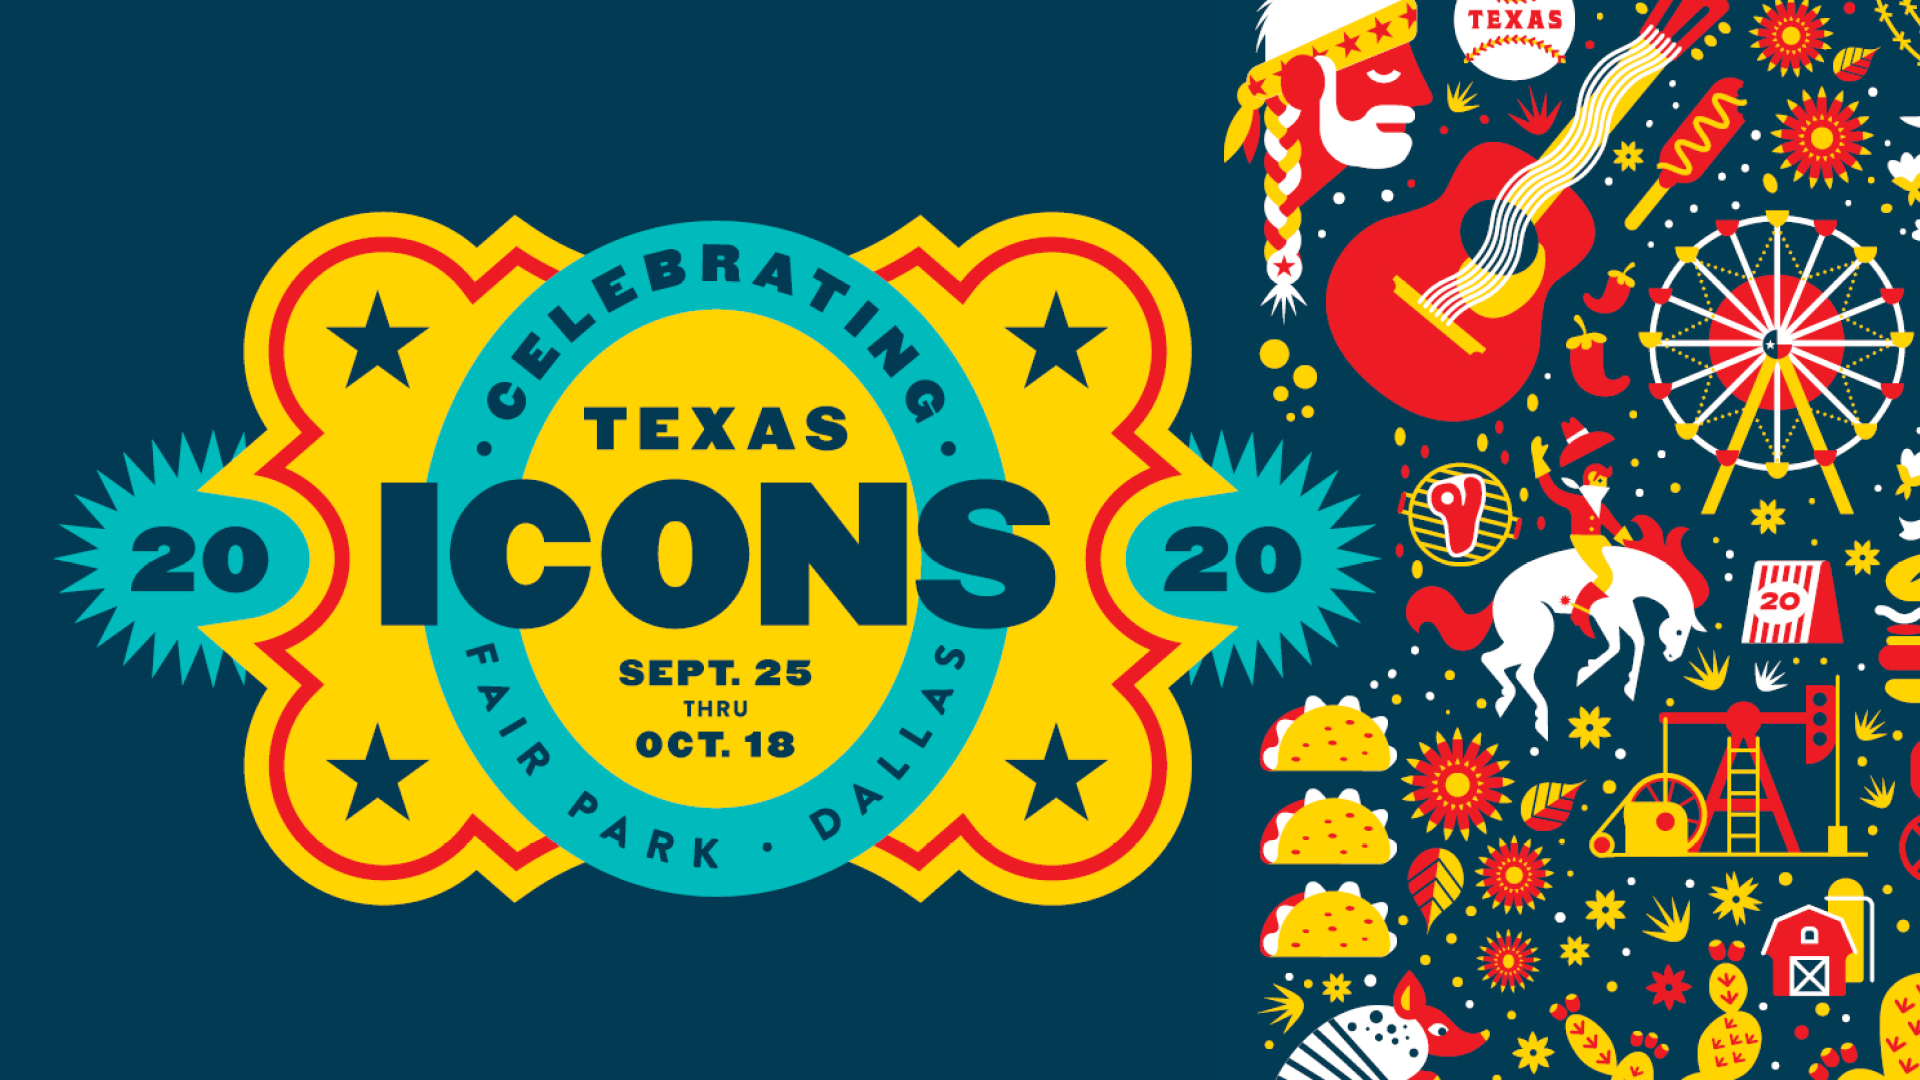 Announcing the 2020 Theme for the State Fair of Texas: &quot;Celebrating Texas Icons&quot; | State Fair of ...